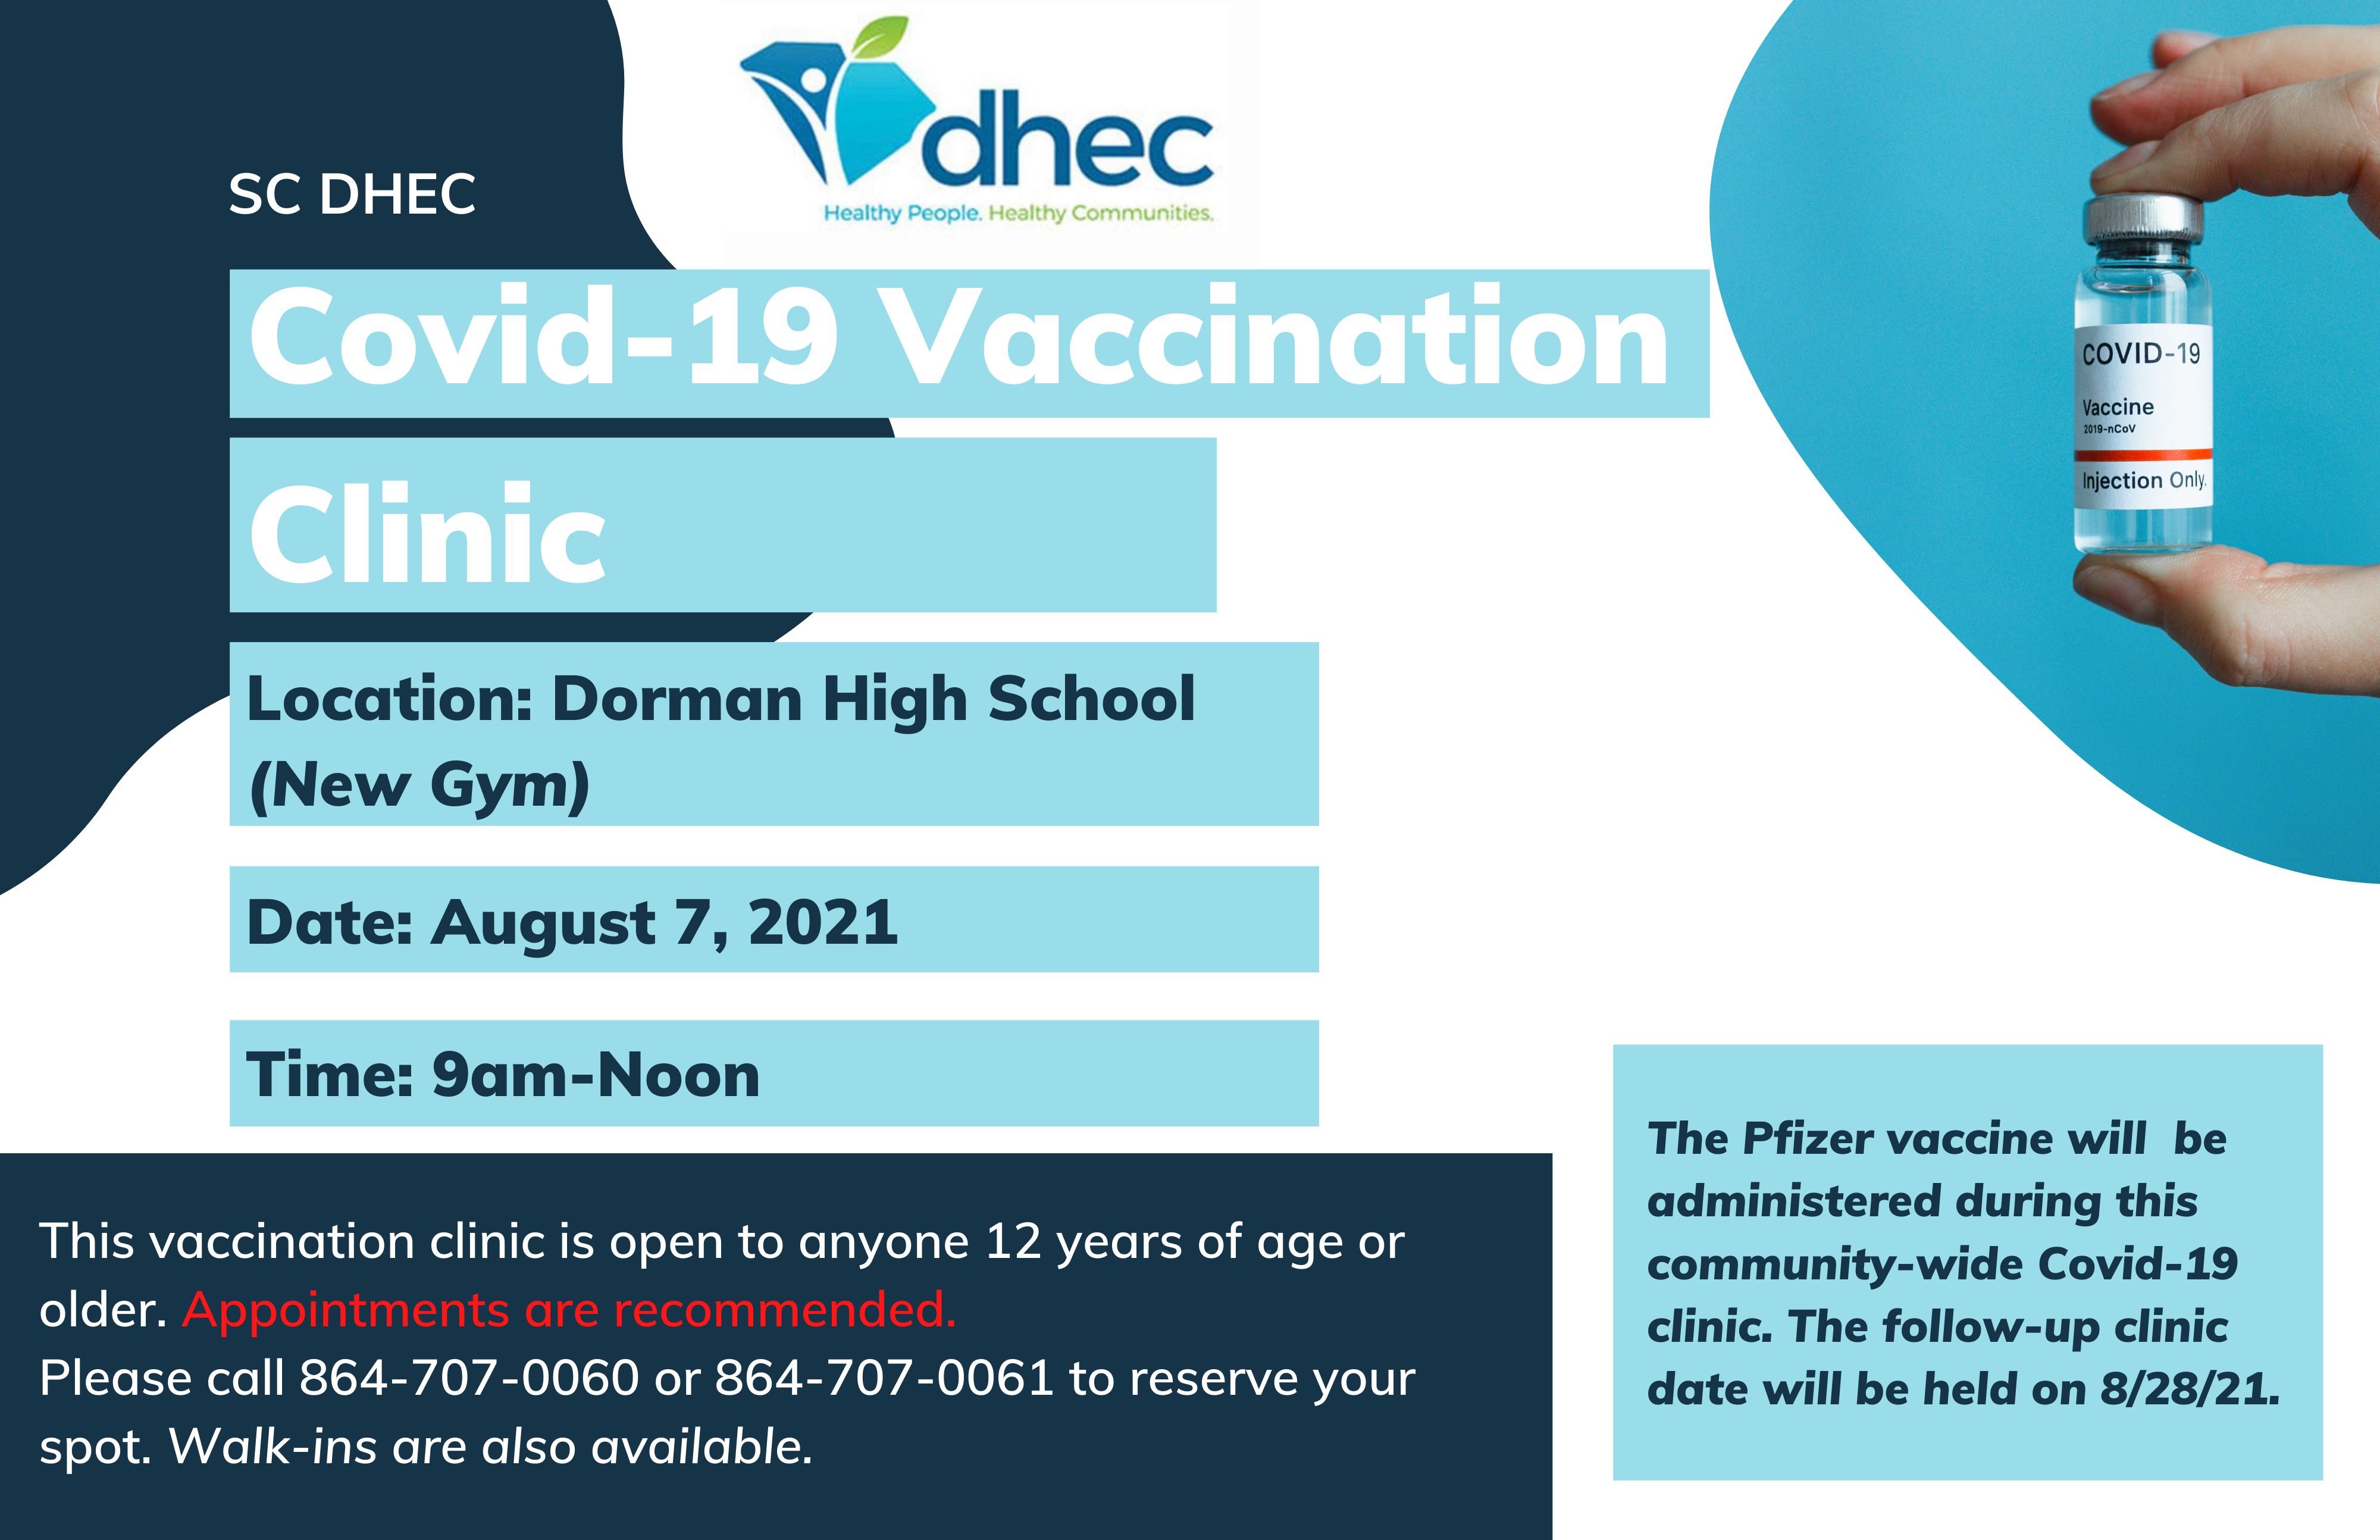 Vaccination Clinic Information